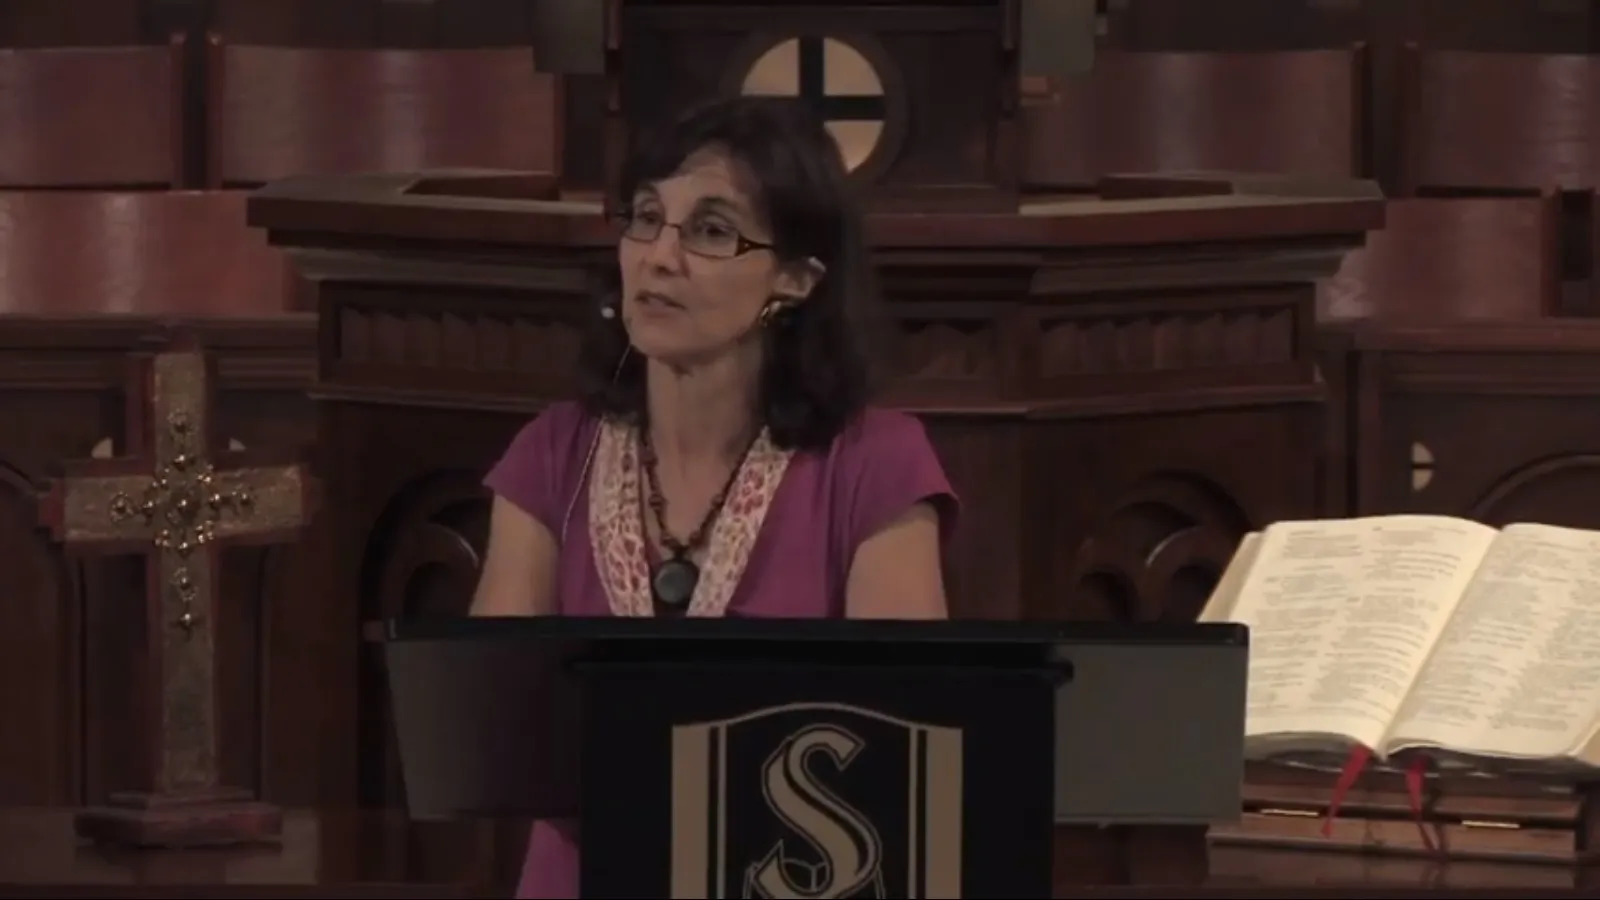 Rosaria Butterfield thanked God for cancelling Pride parades with Coronavirus